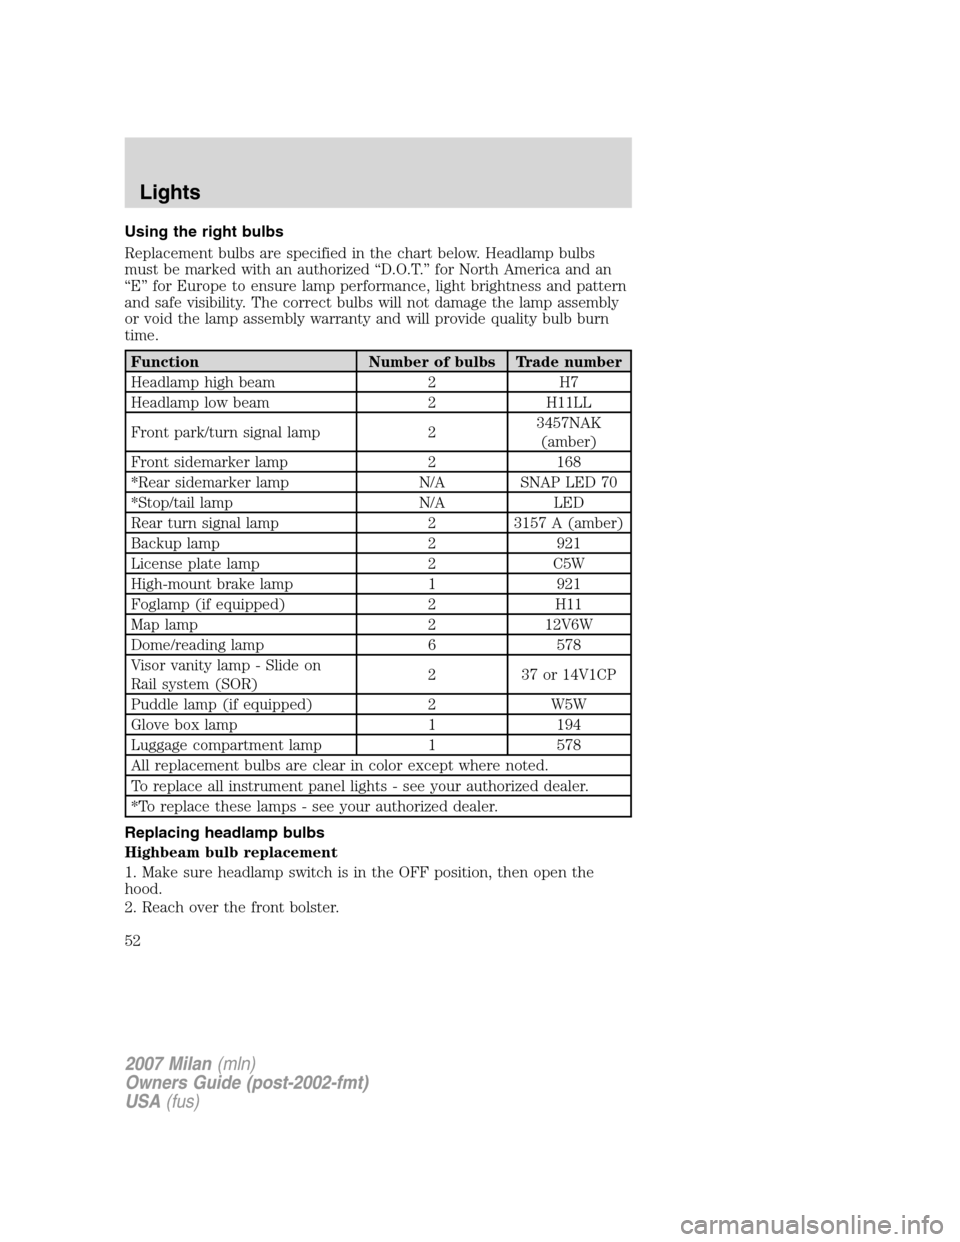 Mercury Milan 2007  Owners Manuals Using the right bulbs
Replacement bulbs are specified in the chart below. Headlamp bulbs
must be marked with an authorized “D.O.T.” for North America and an
“E” for Europe to ensure lamp perfo